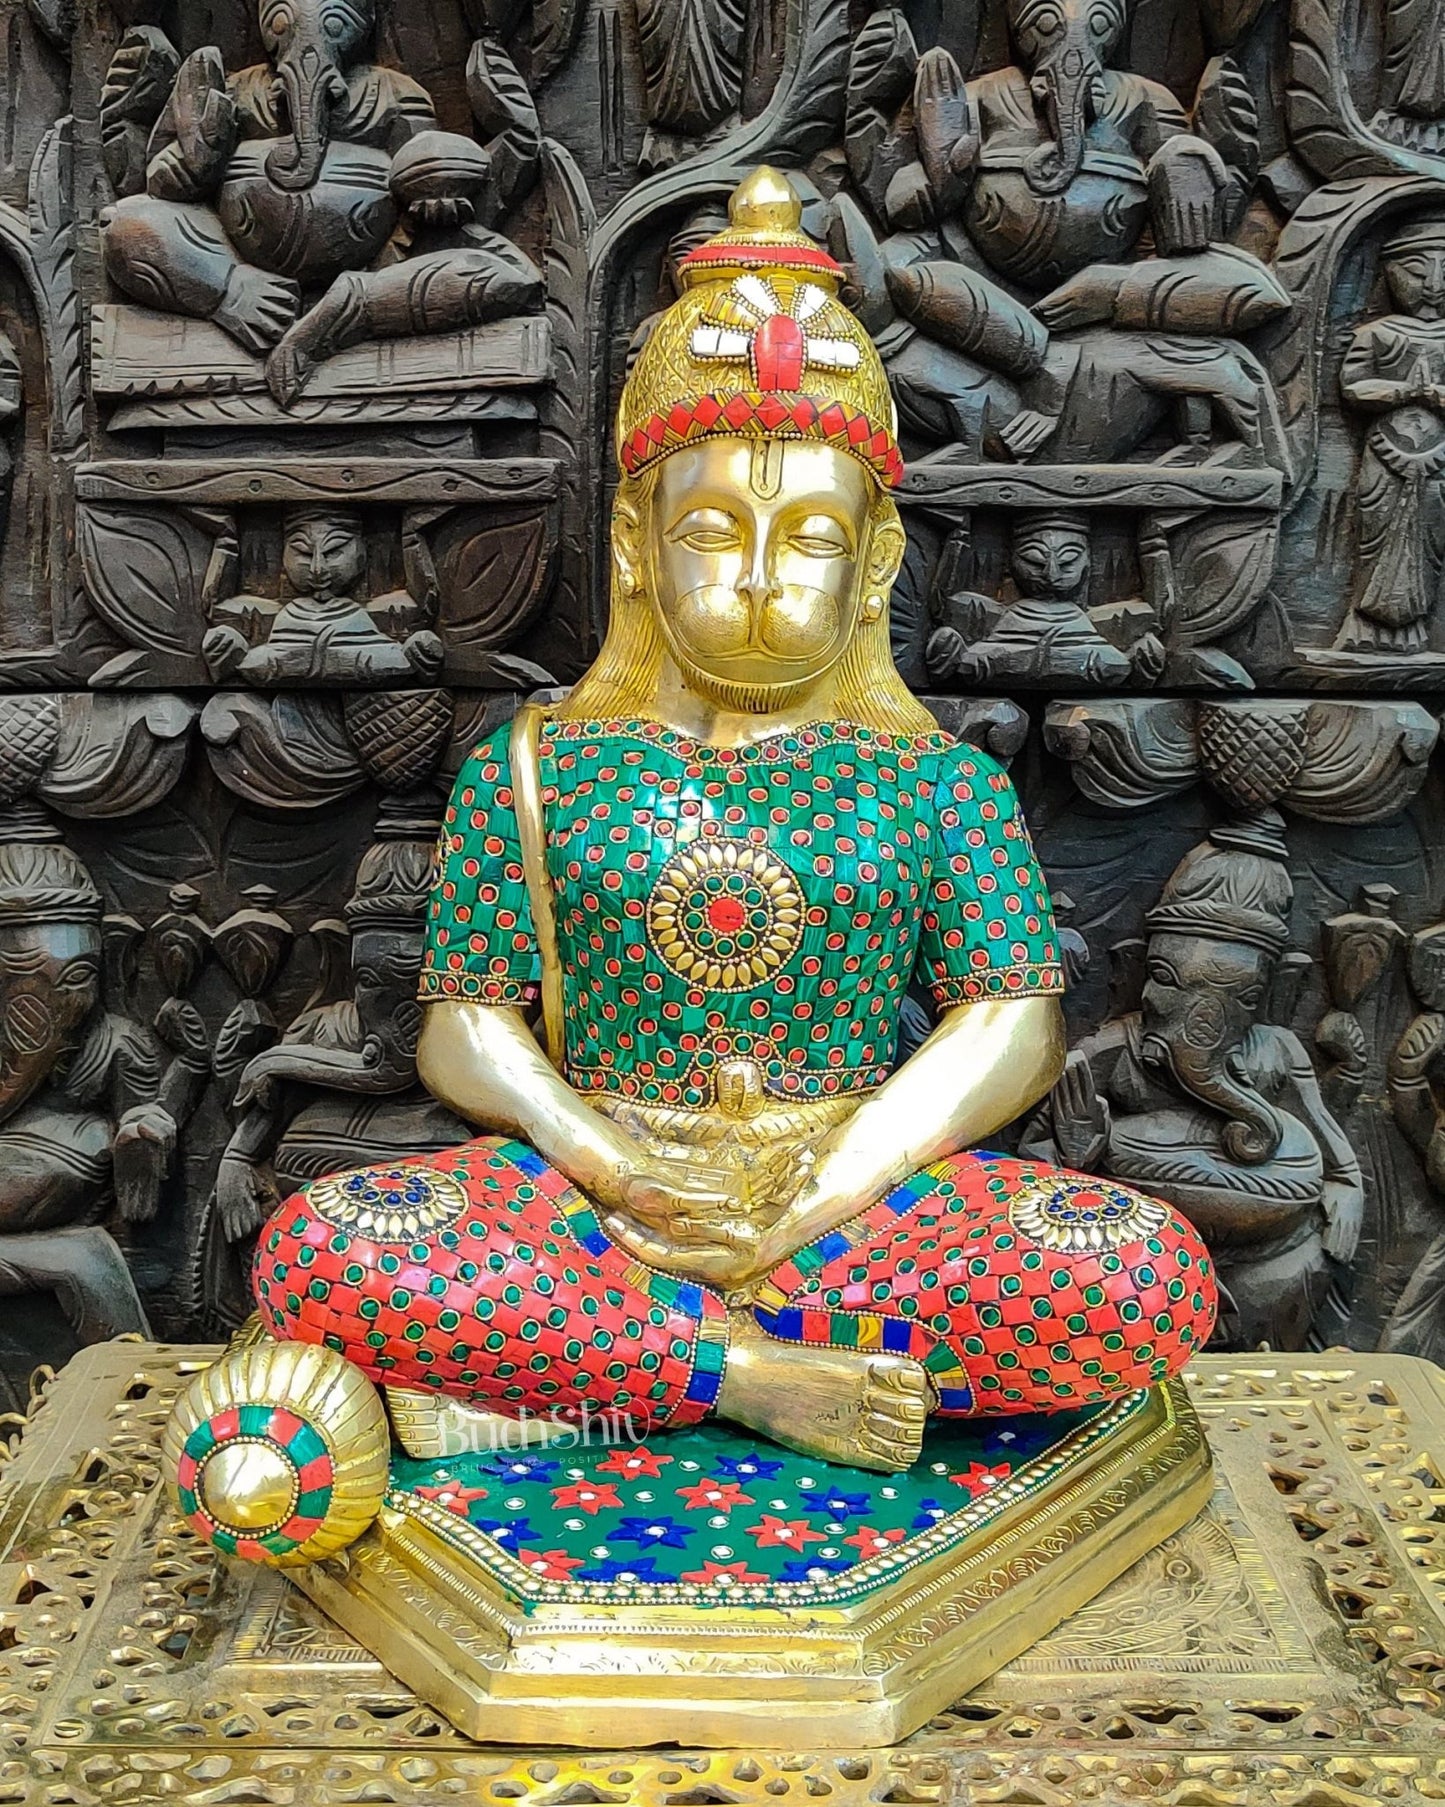 Beautifully Handcrafted Lord Hanuman Statue | Seated in Meditation | 16" Height - Budhshiv.com